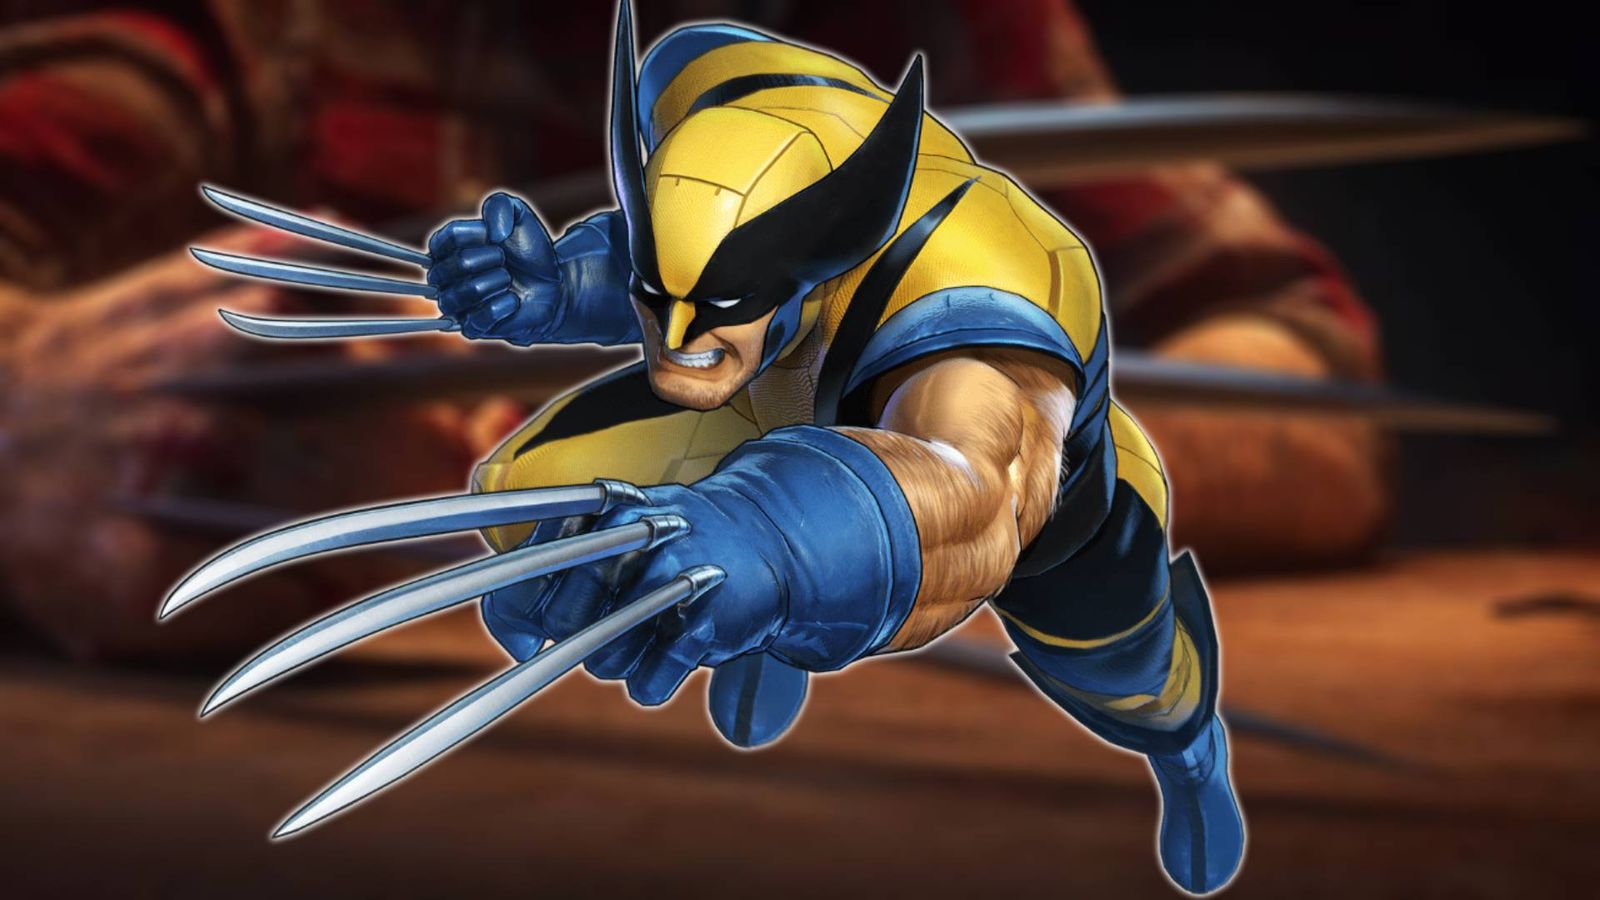 Wolverine is flying through the air with his claws out